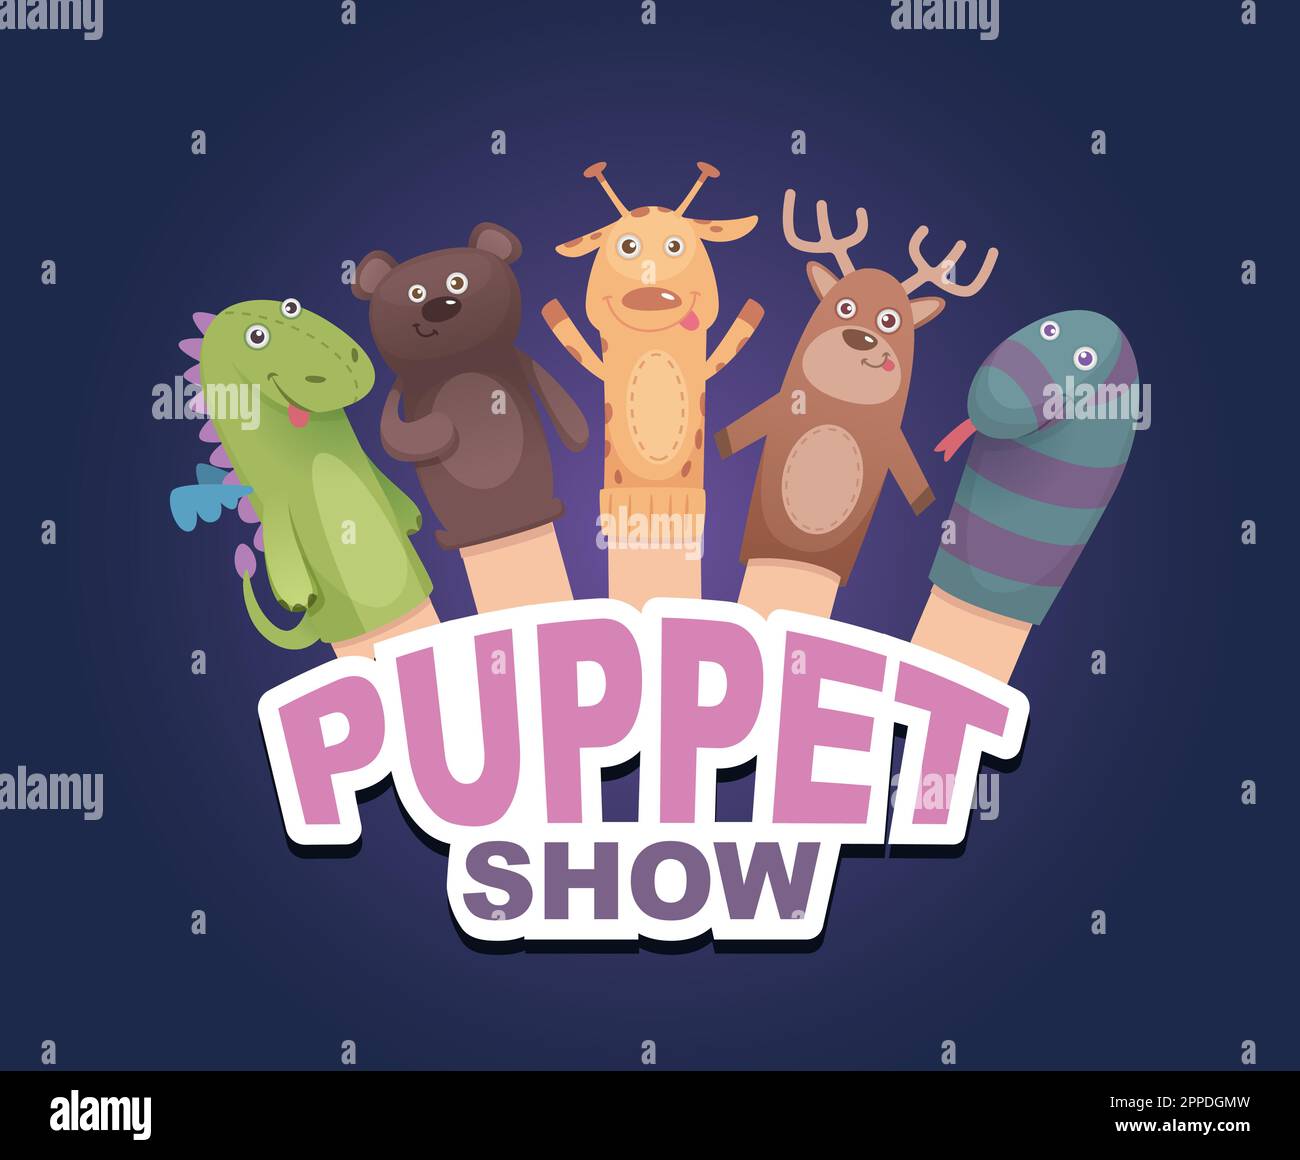 Puppet show. cartoon animals socks puppets. Vector logotype for theatre attraction Stock Vector